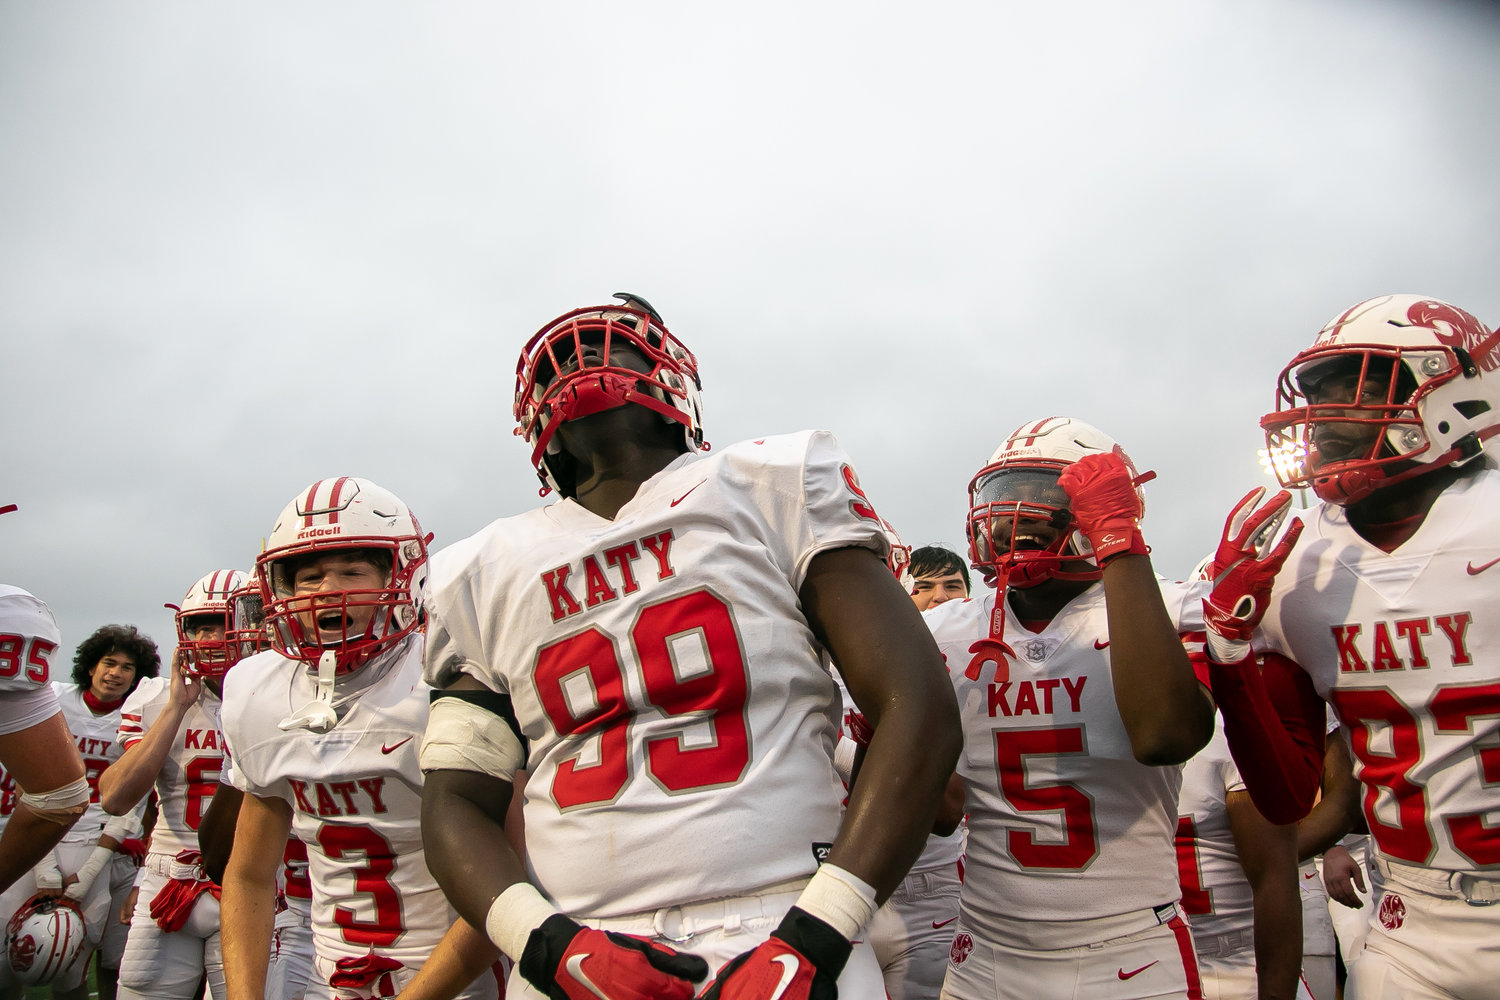 Katy celebrates after Friday's Class 6A-Divison II Region III Semifinal at Turner Stadium.